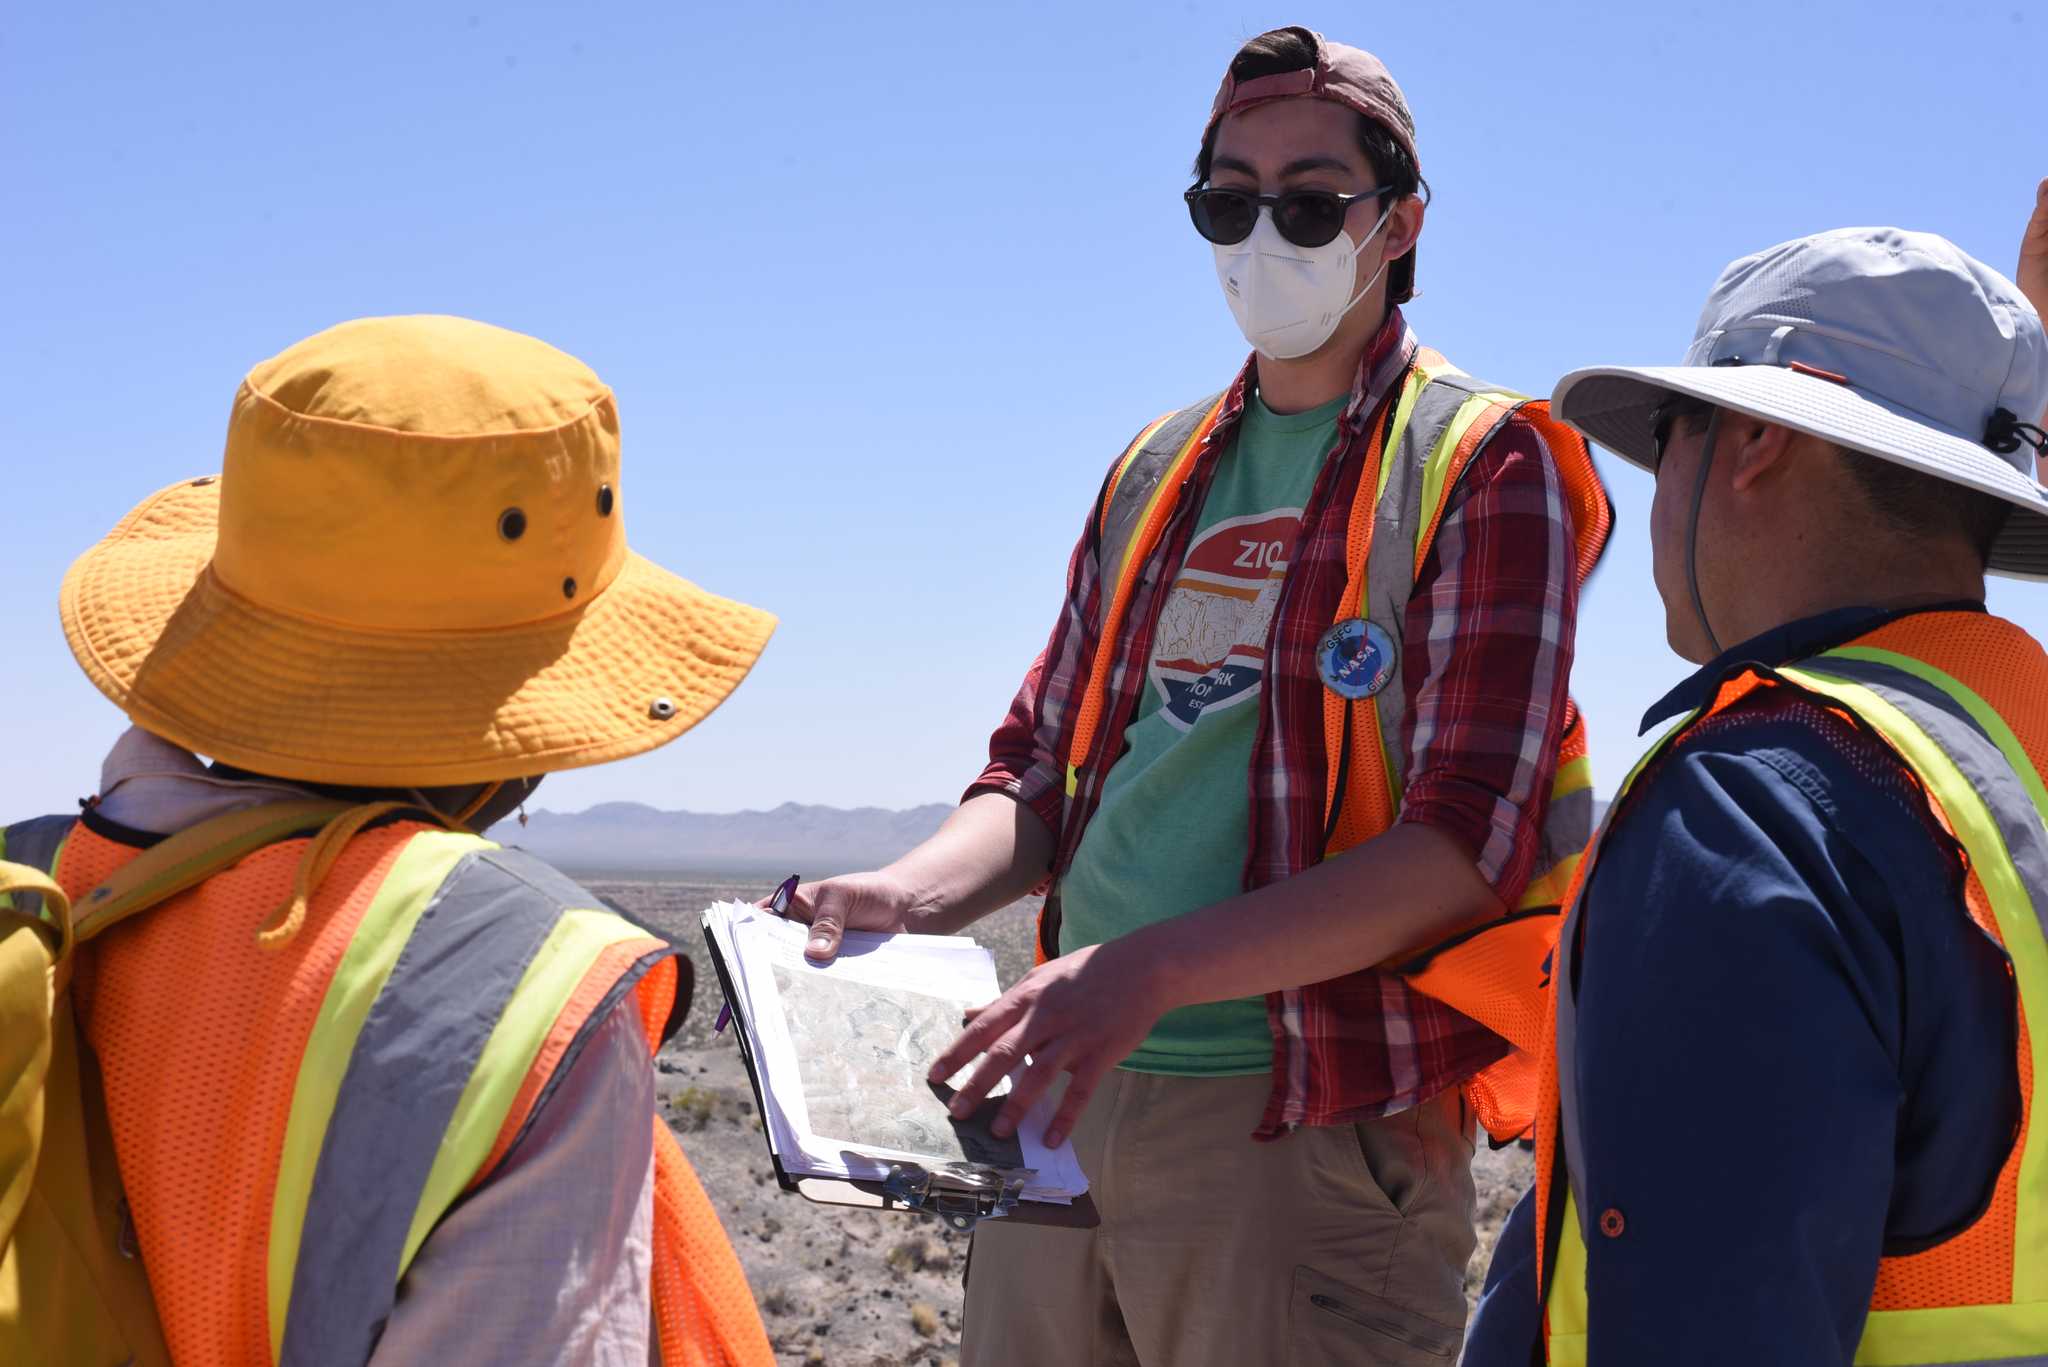 Zach More discusses data with colleagues at Potrillo Volcanic Field in New Mexico, April 2022